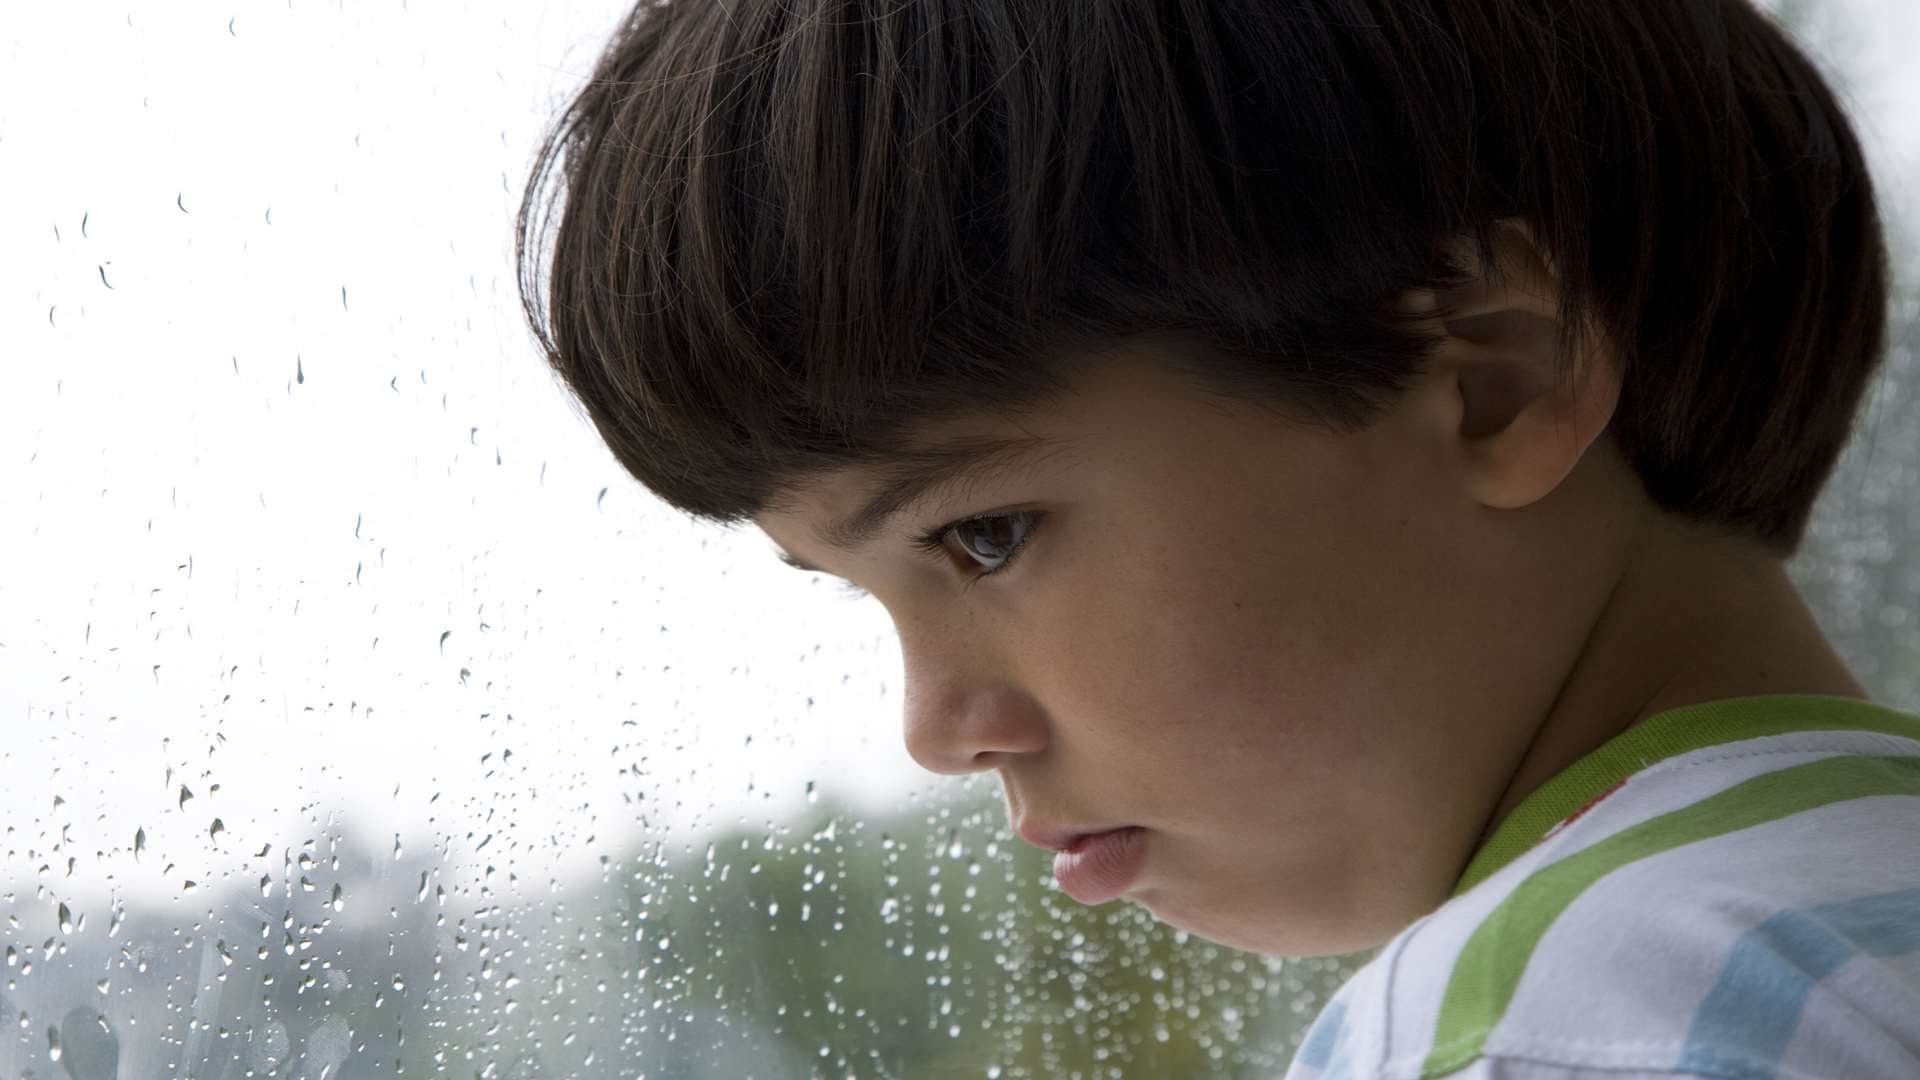 Children who are told to stop crying or behave are less likely to develop emotional intelligence